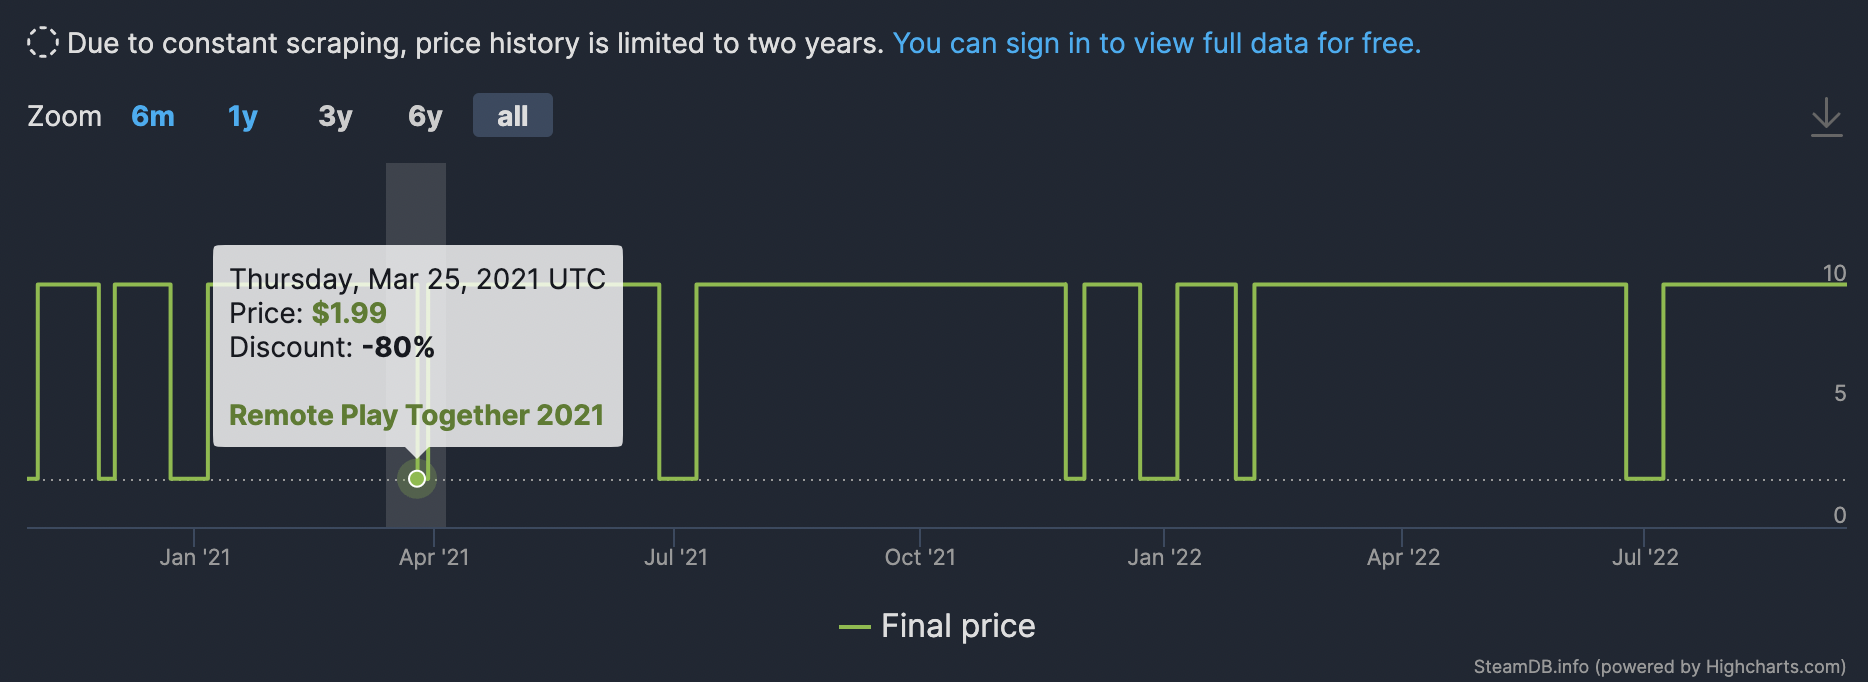 image of price graph for Portal 2 on Steam DB